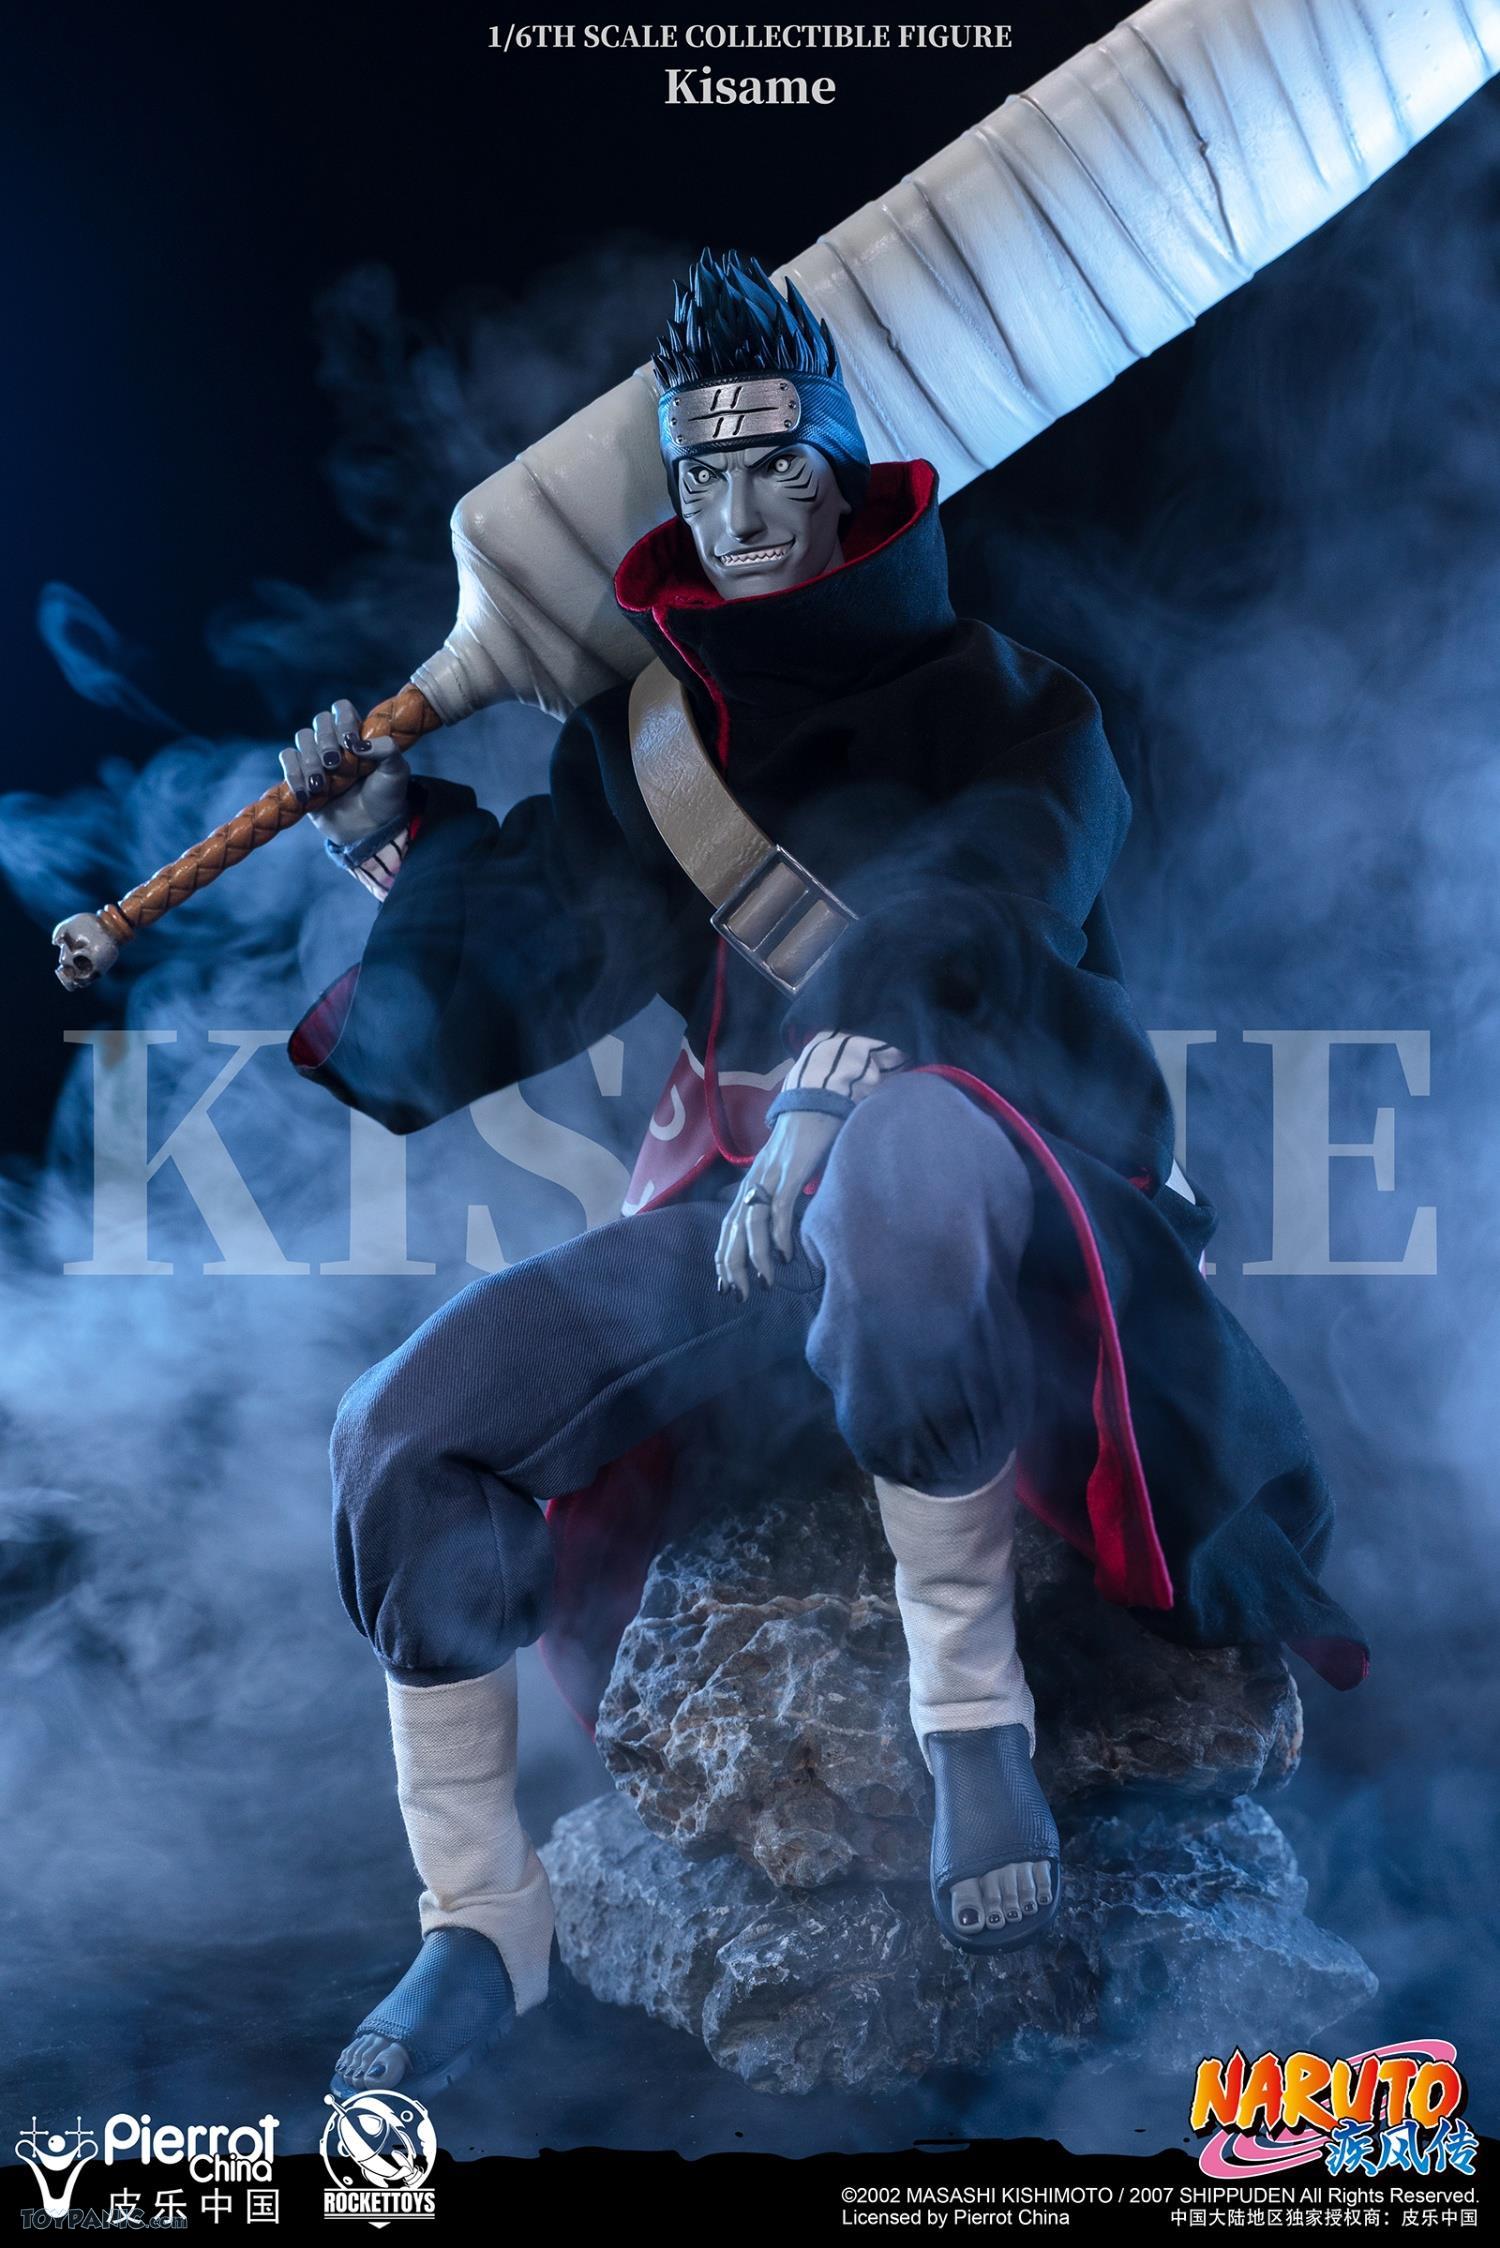 pierrot - NEW PRODUCT: Rocket Toys ROC-007 1/6 Scale Kisame 221202460434PM_5686661